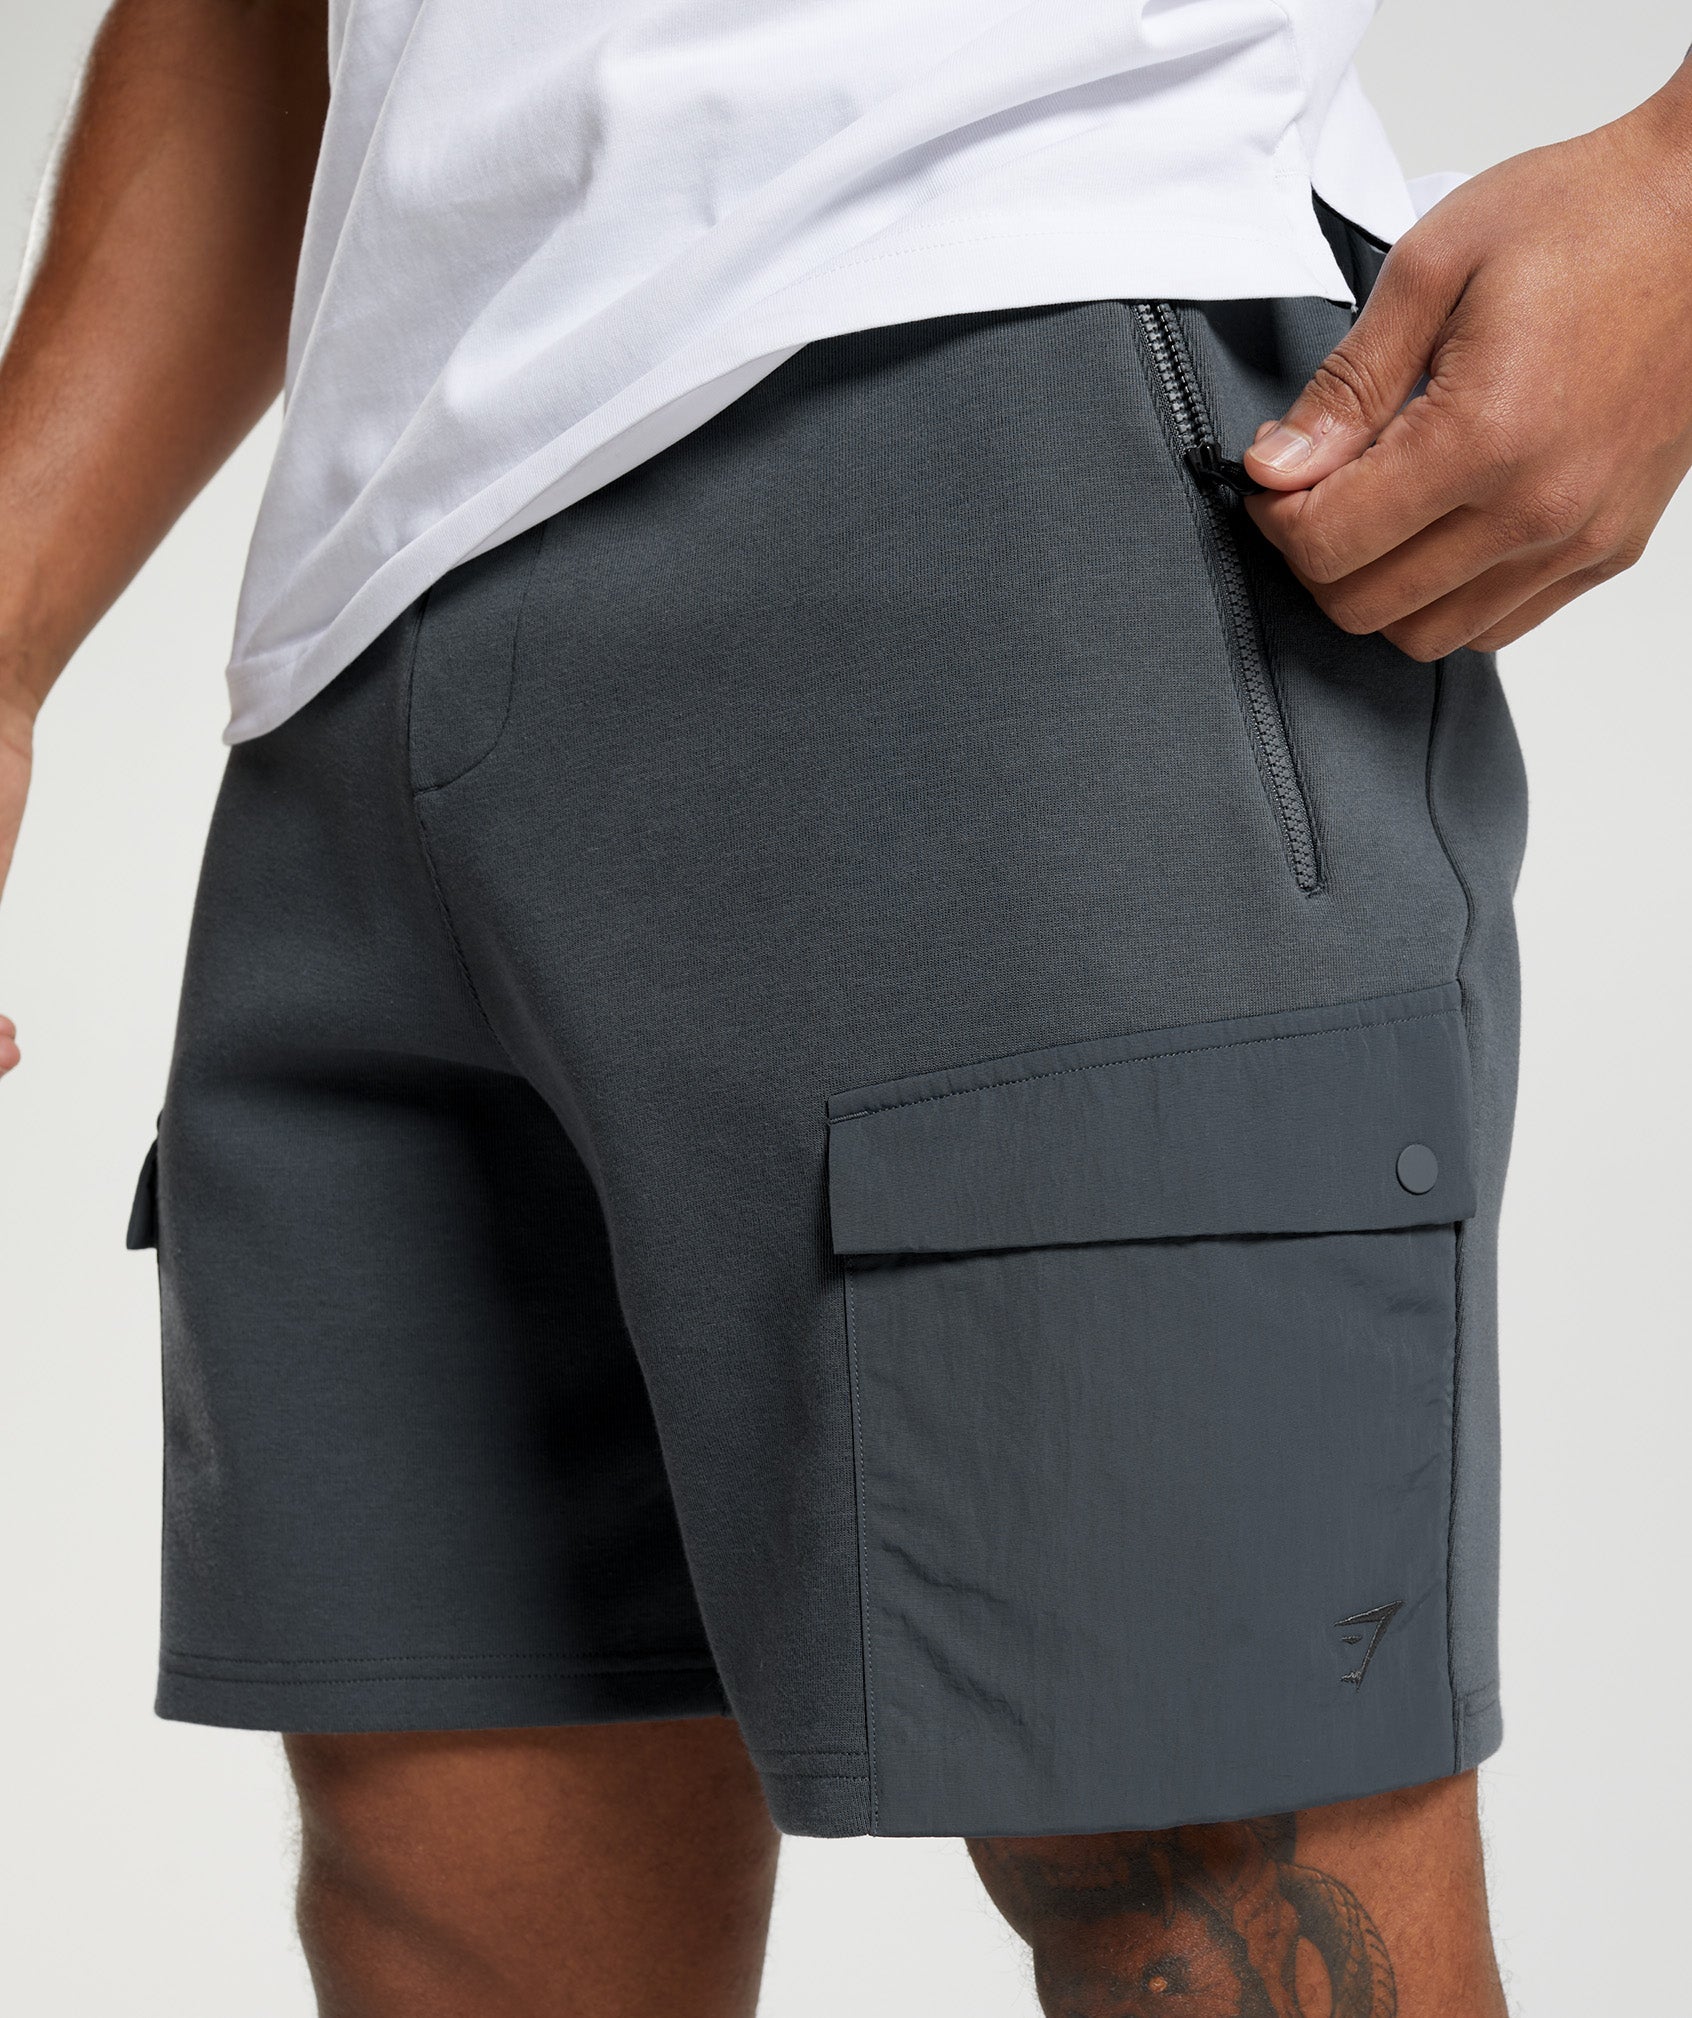 Rest Day Commute Shorts in Cosmic Grey - view 5